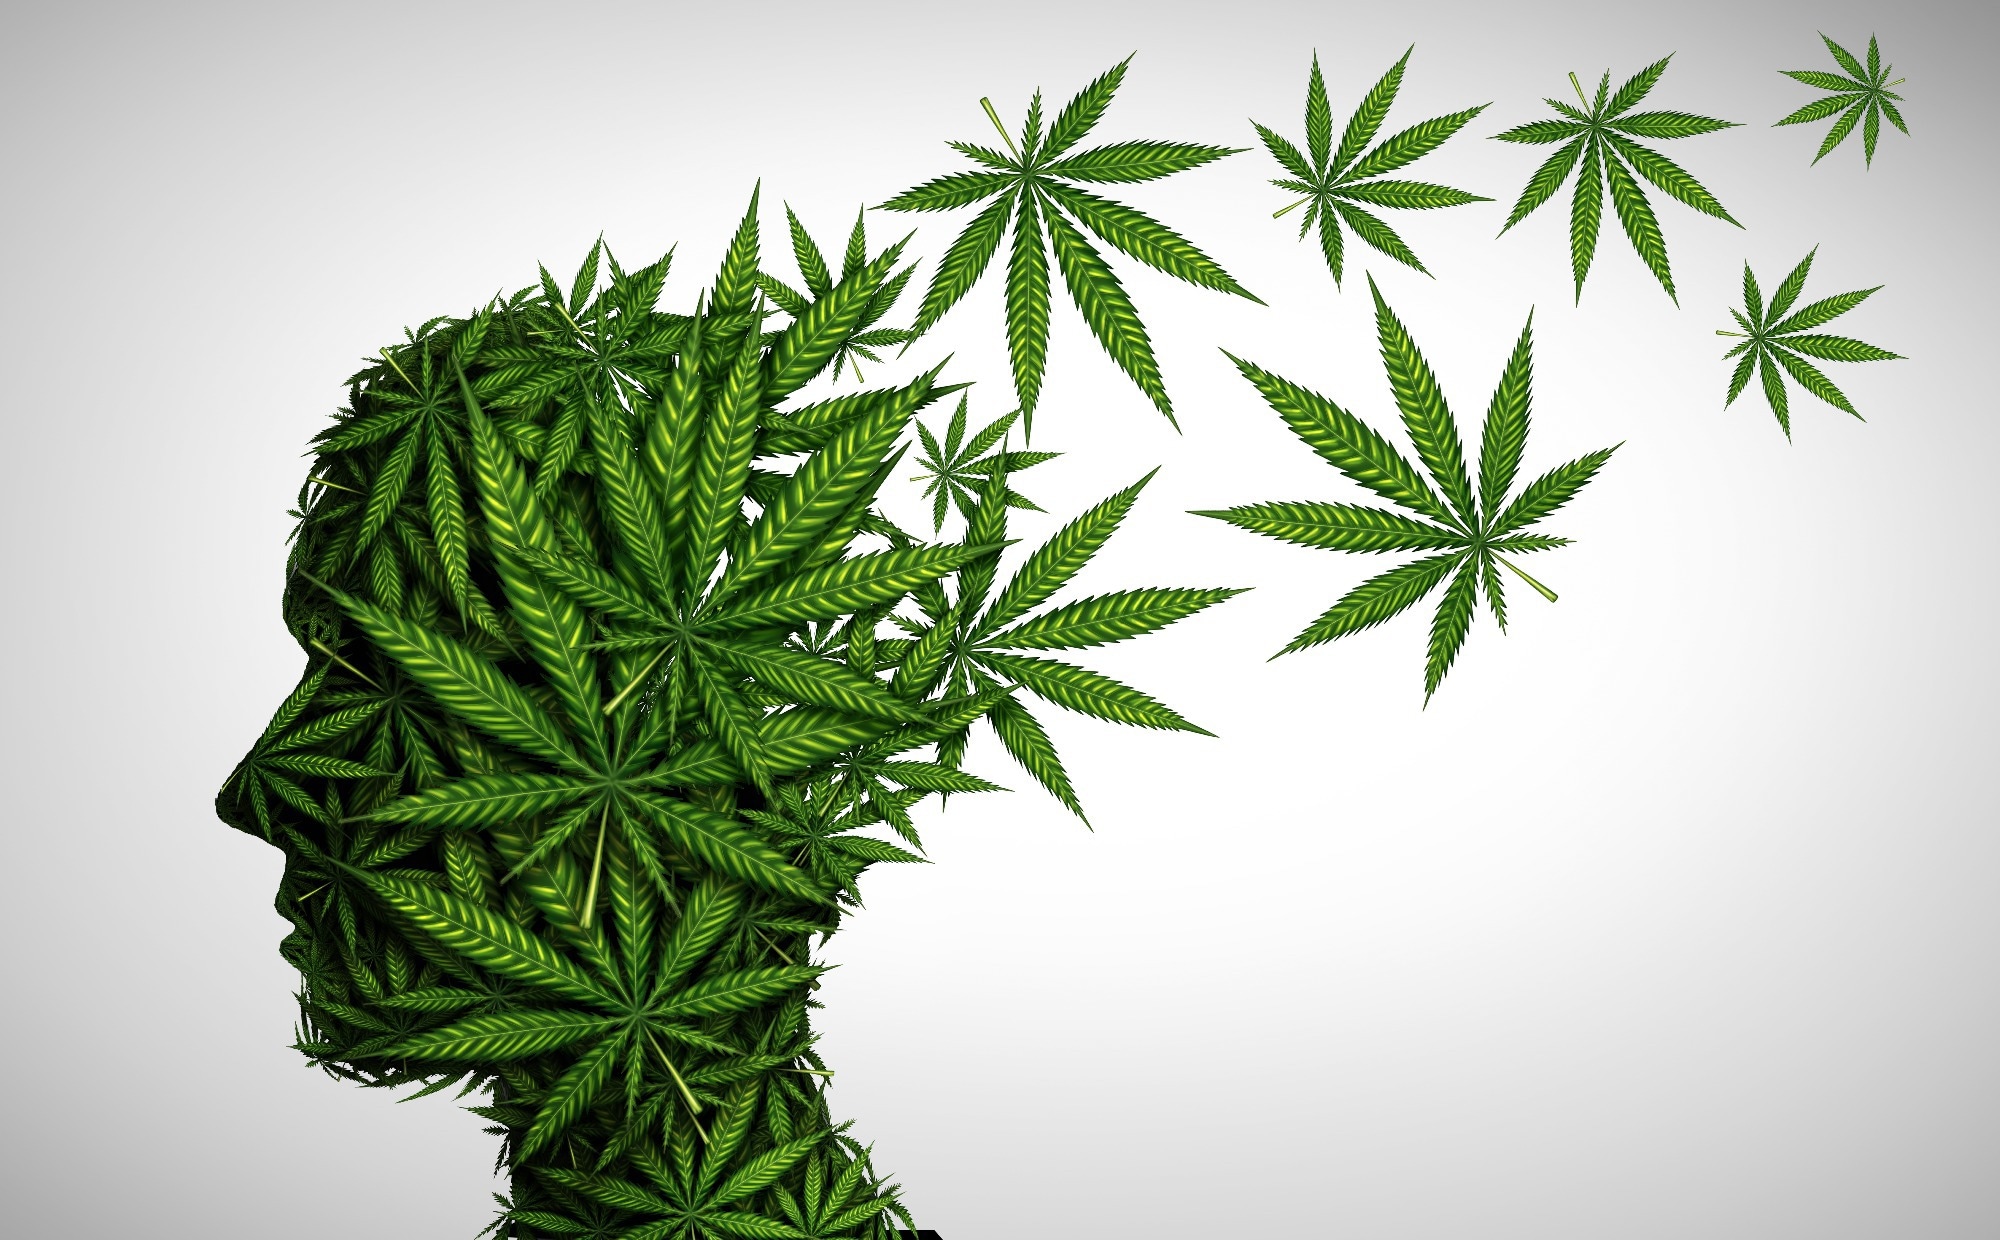 Study: Altered brain structural and functional connectivity in cannabis users. Image Credit: Lightspring / Shutterstock